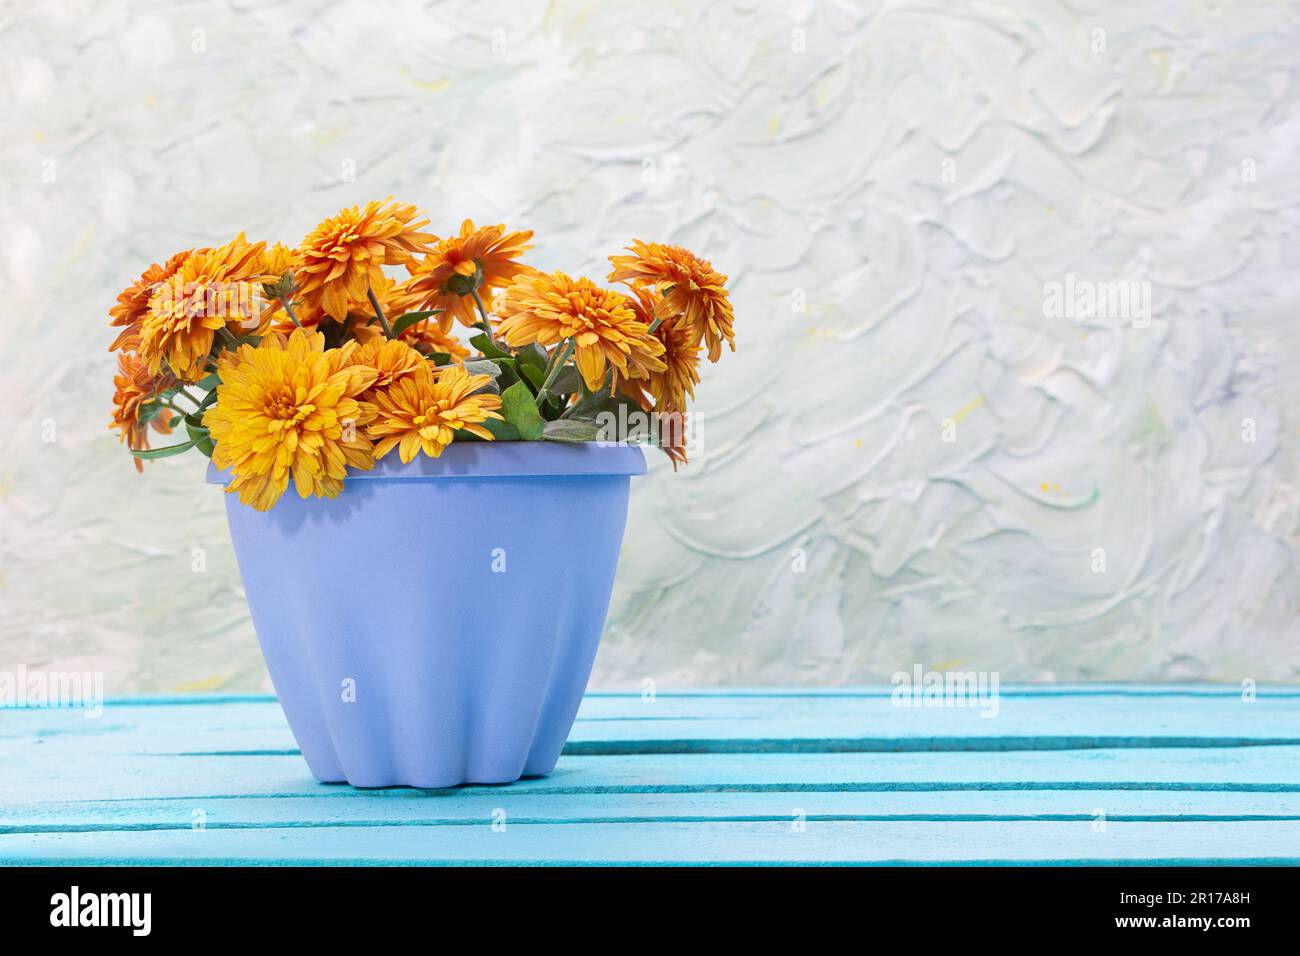 Orange chrysanthemum in blue pot on wooden boards. Gardening, holiday, birthday, women's, mother's day. Copy space Stock Photo